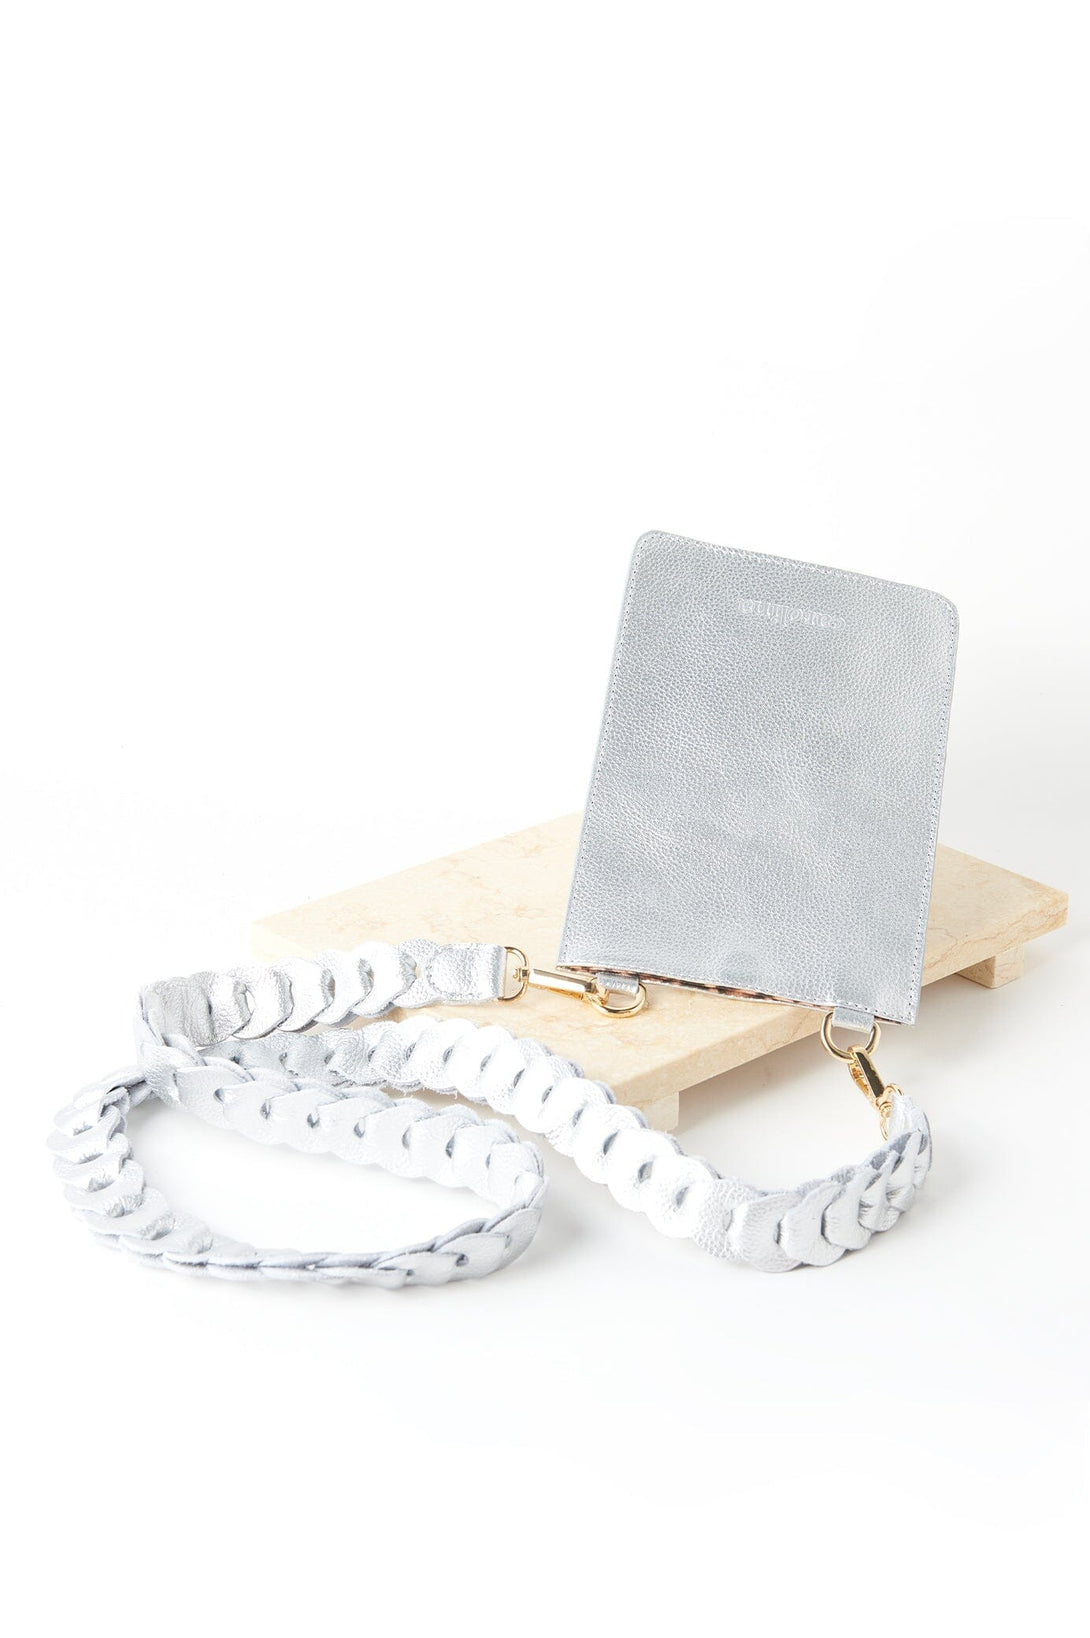 Adelina Mobile Phone Holder Silver Soft Leather Leather